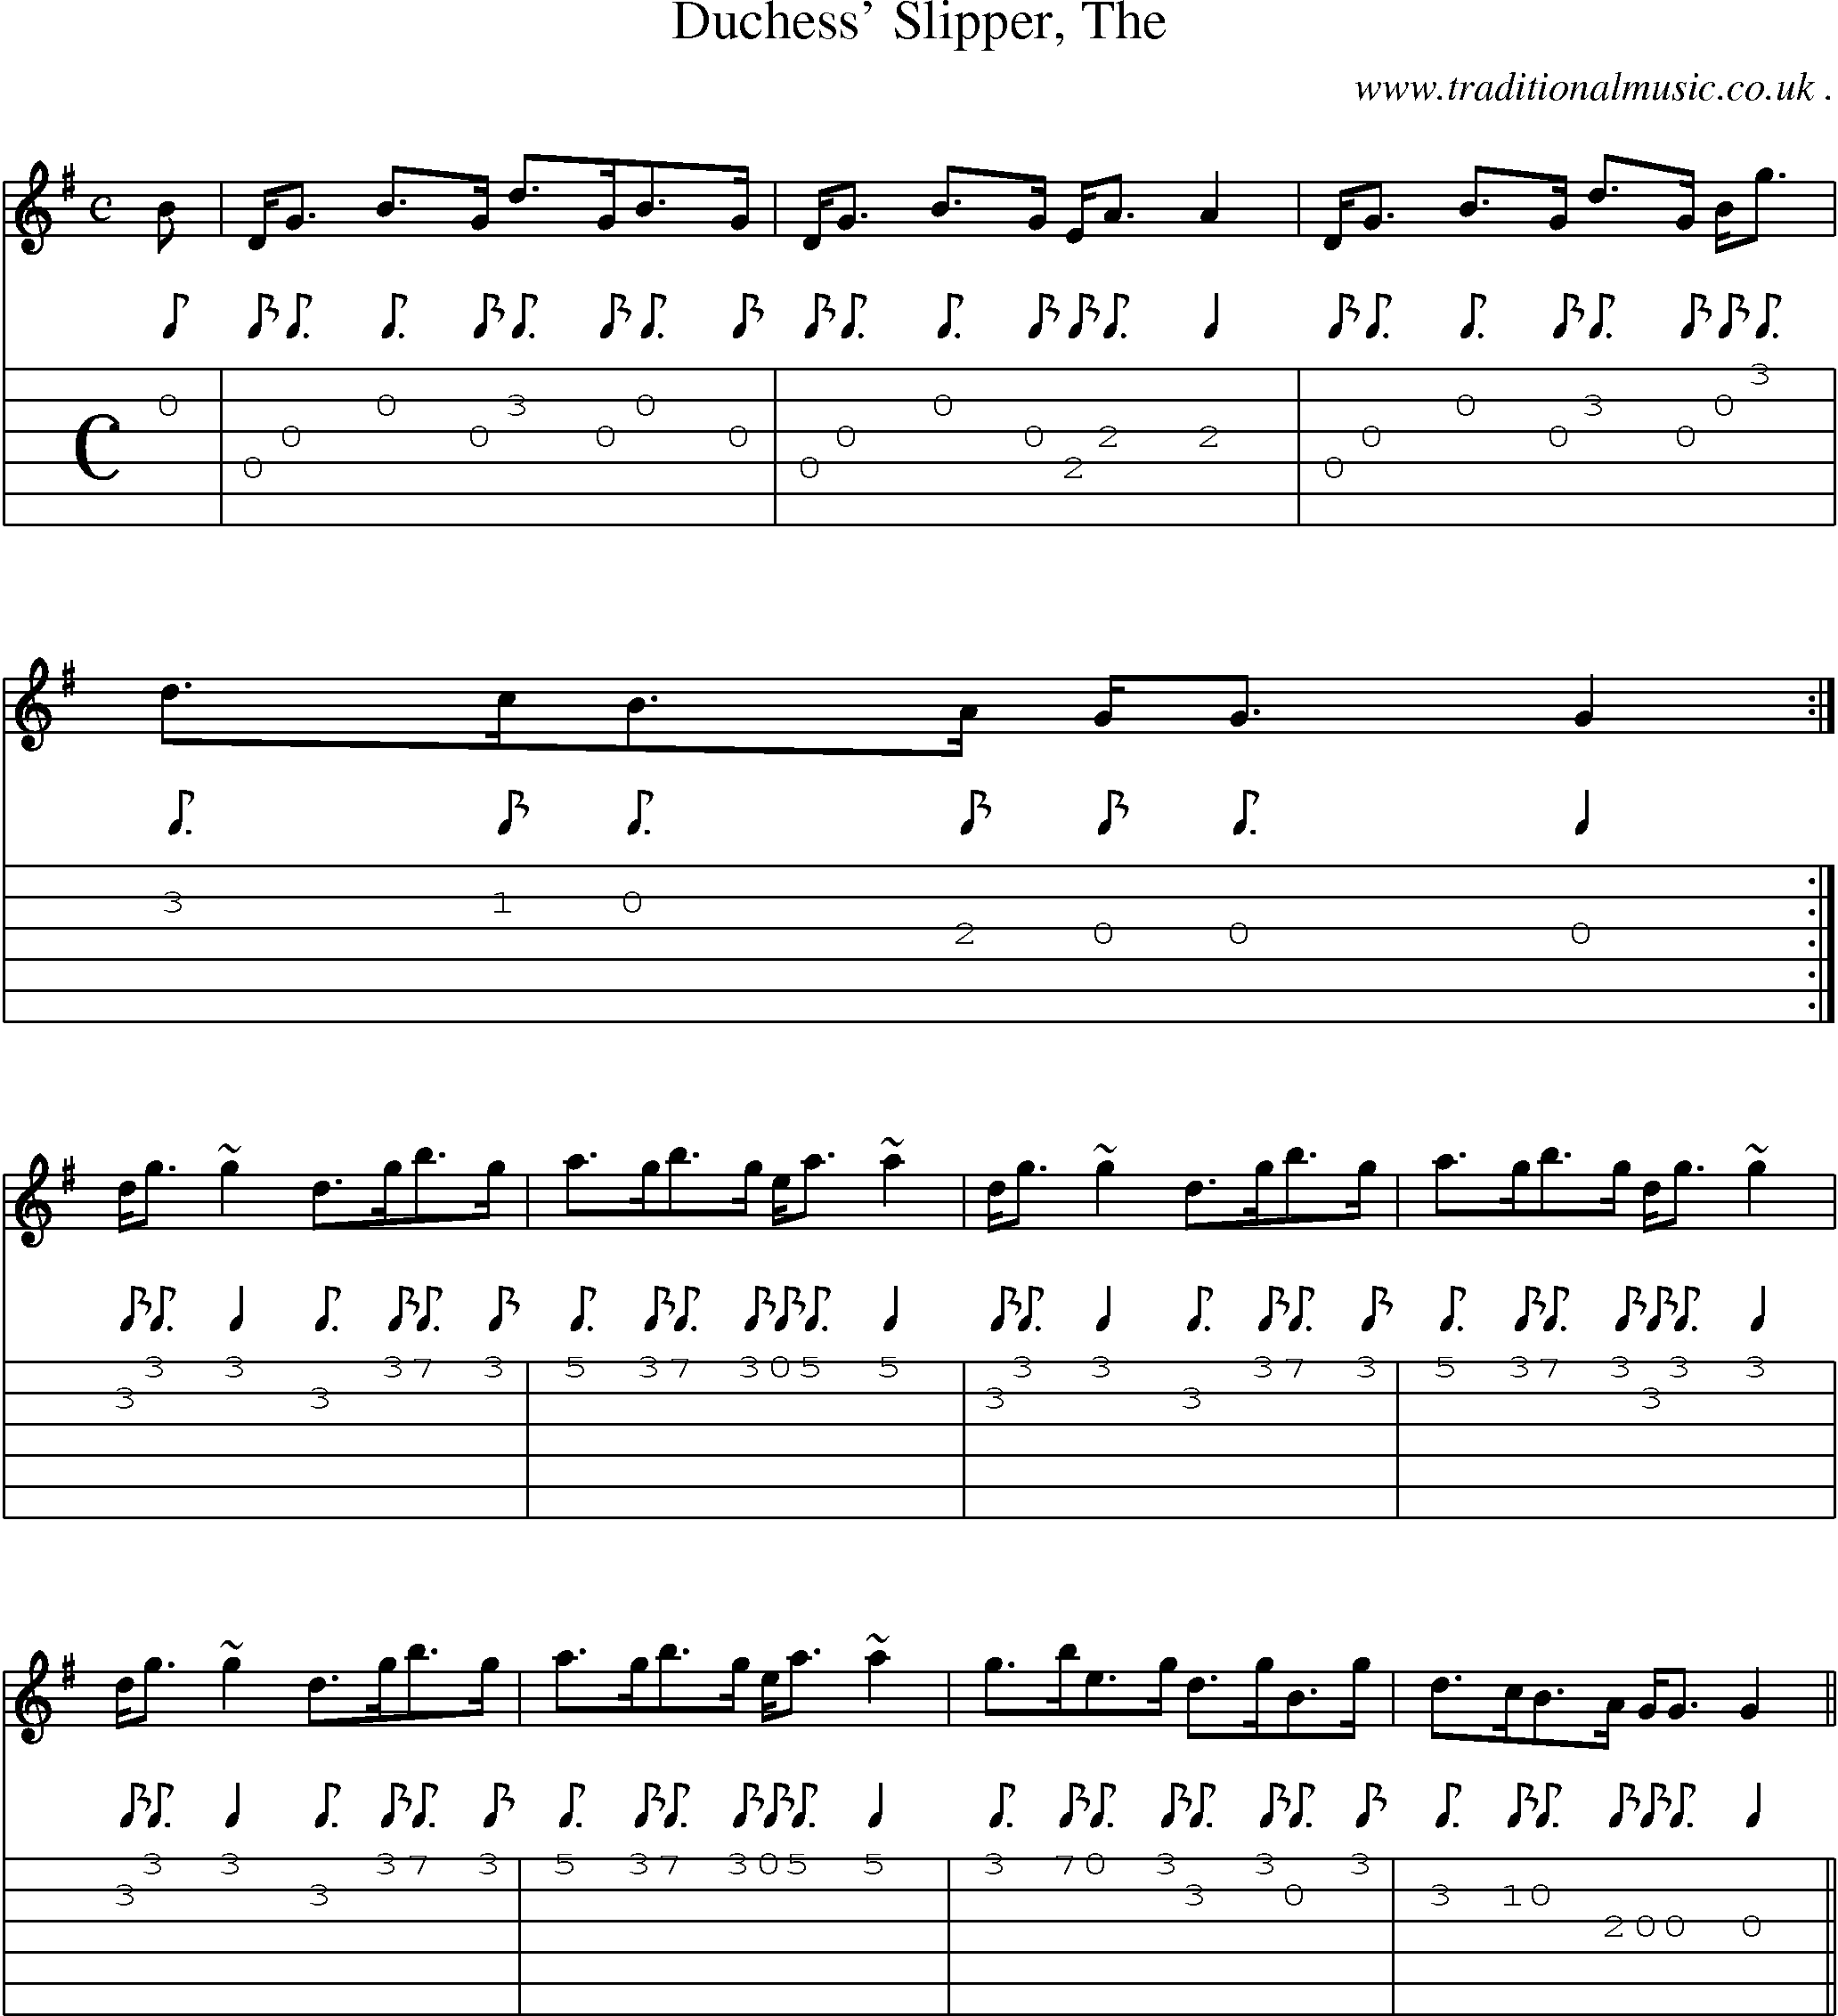 Sheet-music  score, Chords and Guitar Tabs for Duchess Slipper The